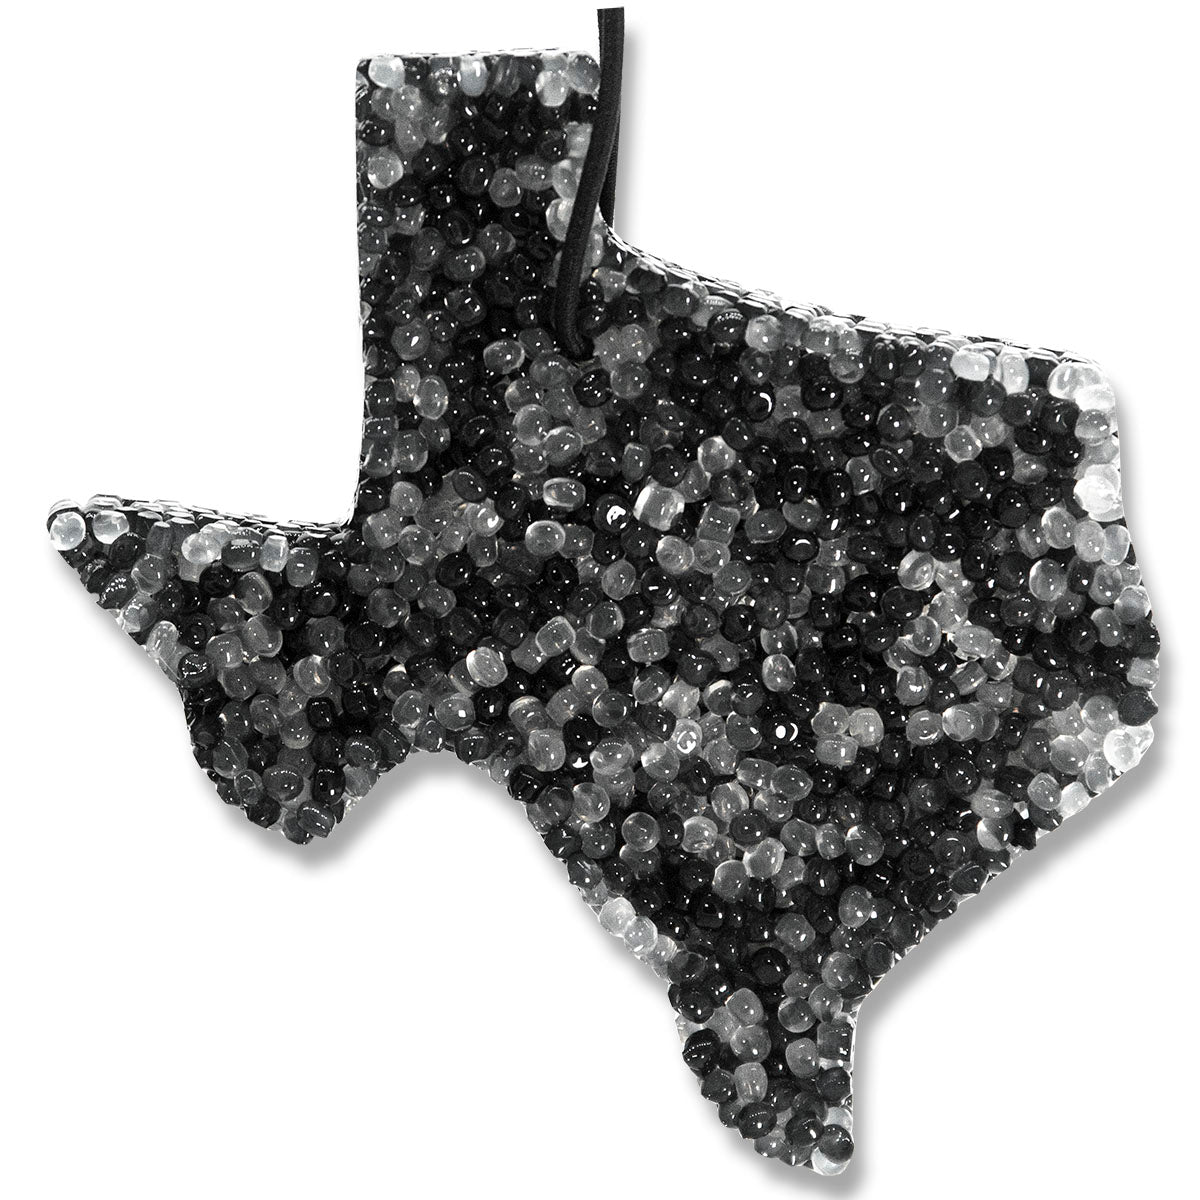 Leather, Lone Star Candles & More’s Premium Strongly Scented Freshies, Authentic Aroma of Genuine Leather, Car & Air Freshener, USA Made in Texas, Black & White Texas State 1-Pack